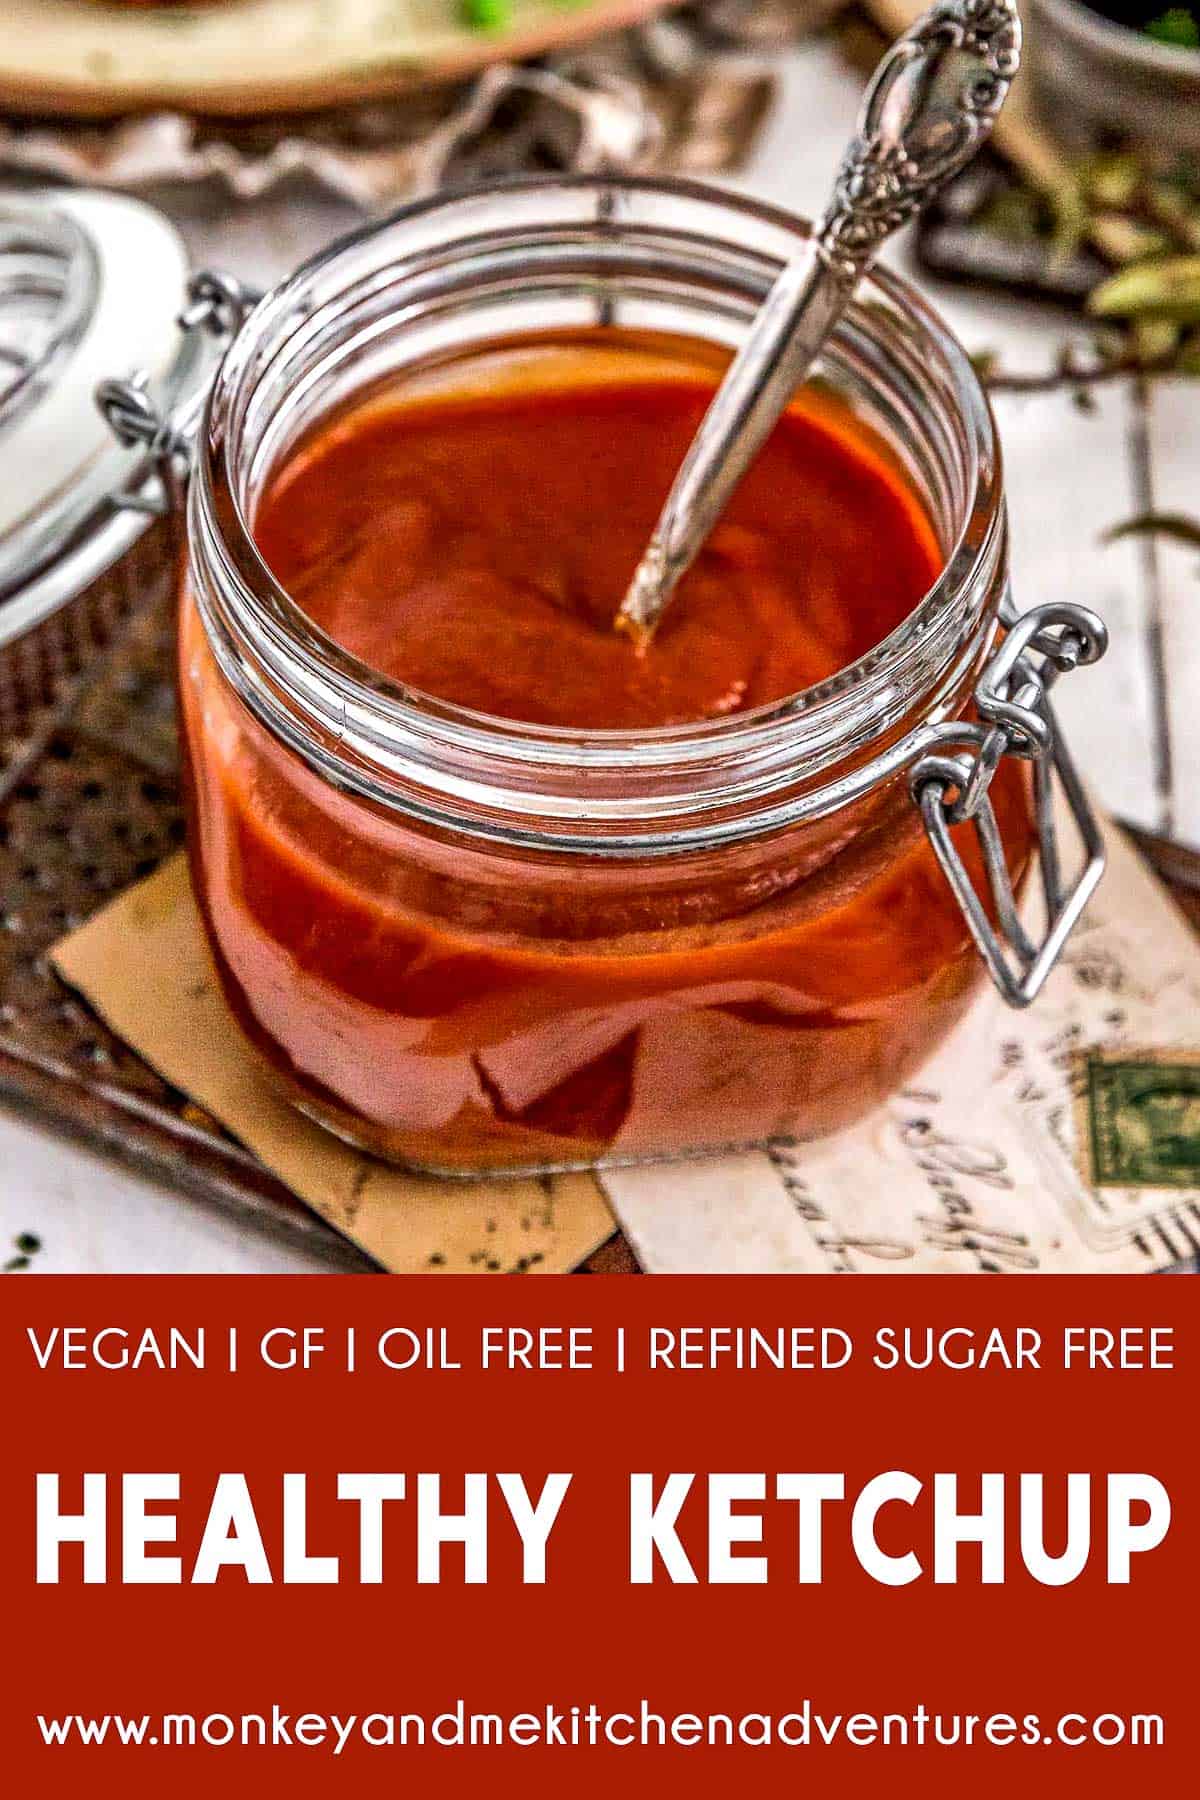 Healthy Ketchup with text description